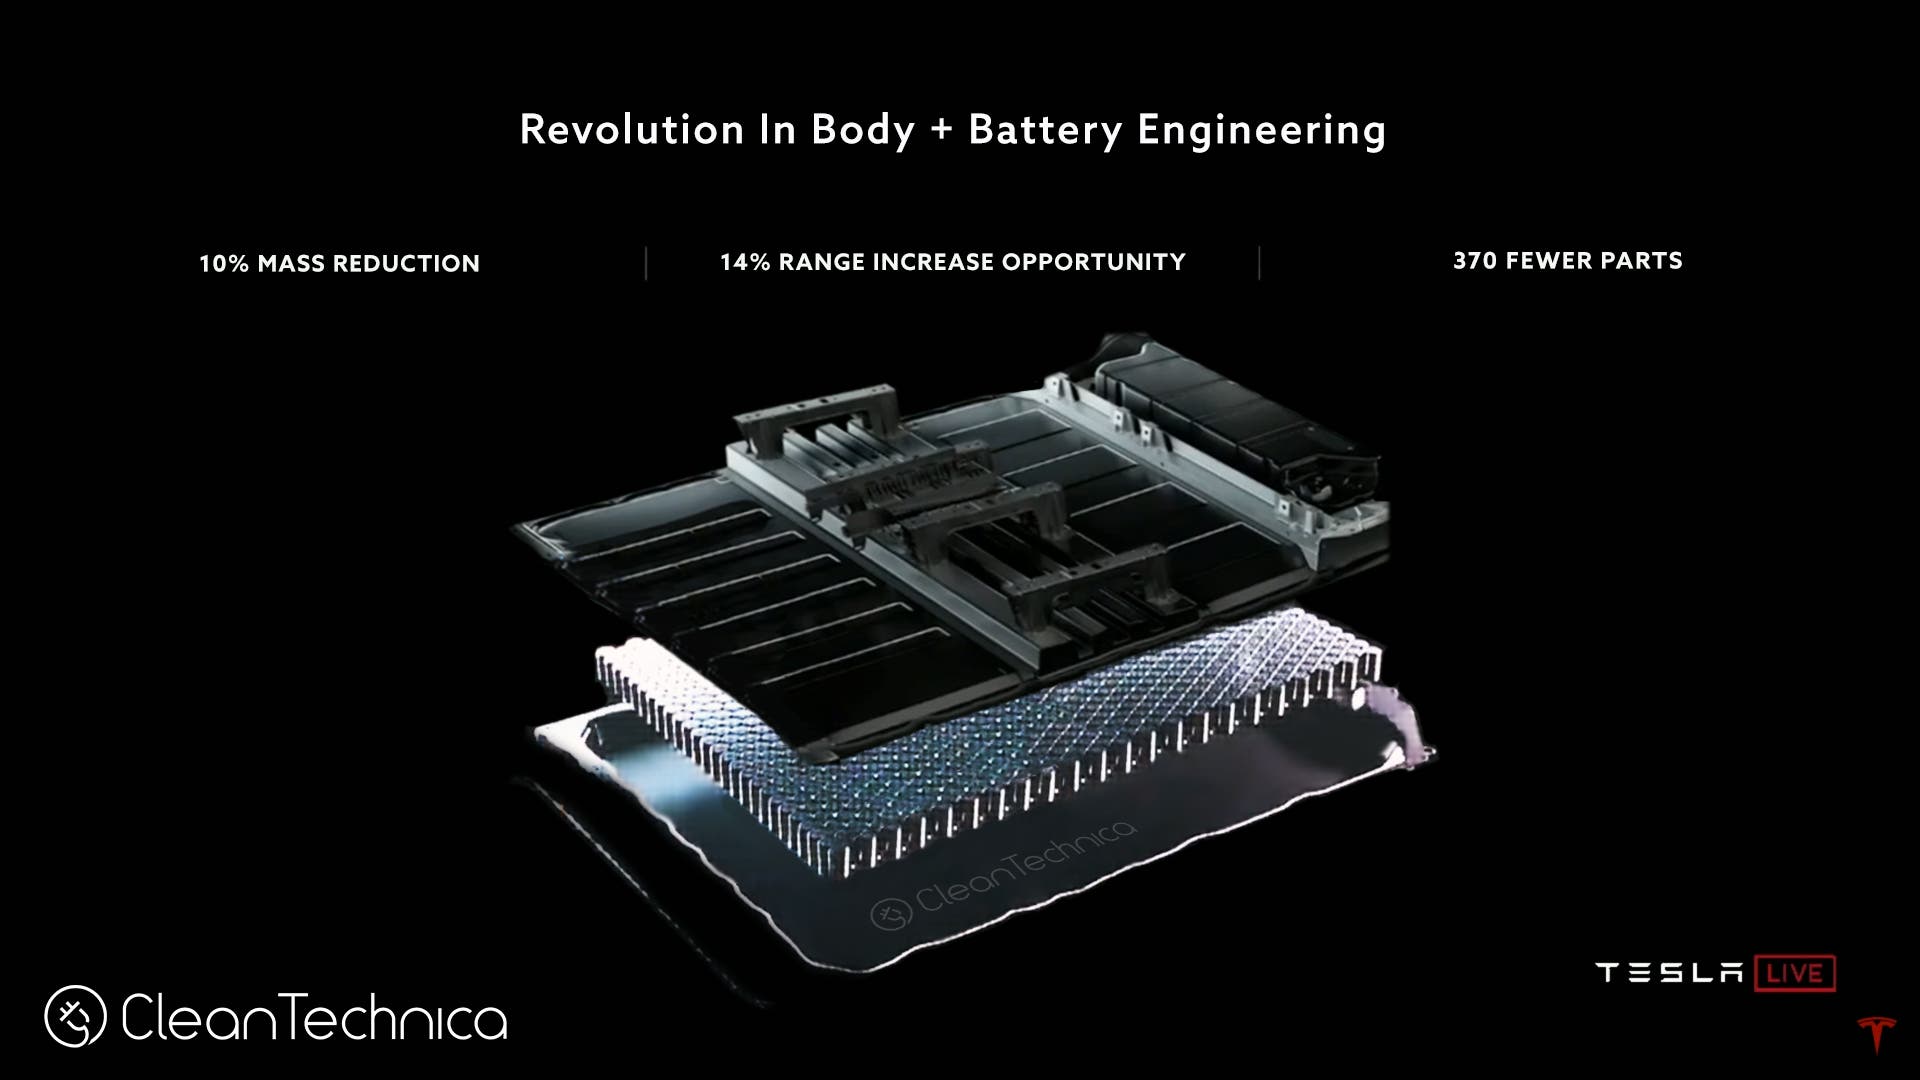 Tesla's new homemade batteries are in test cars on the